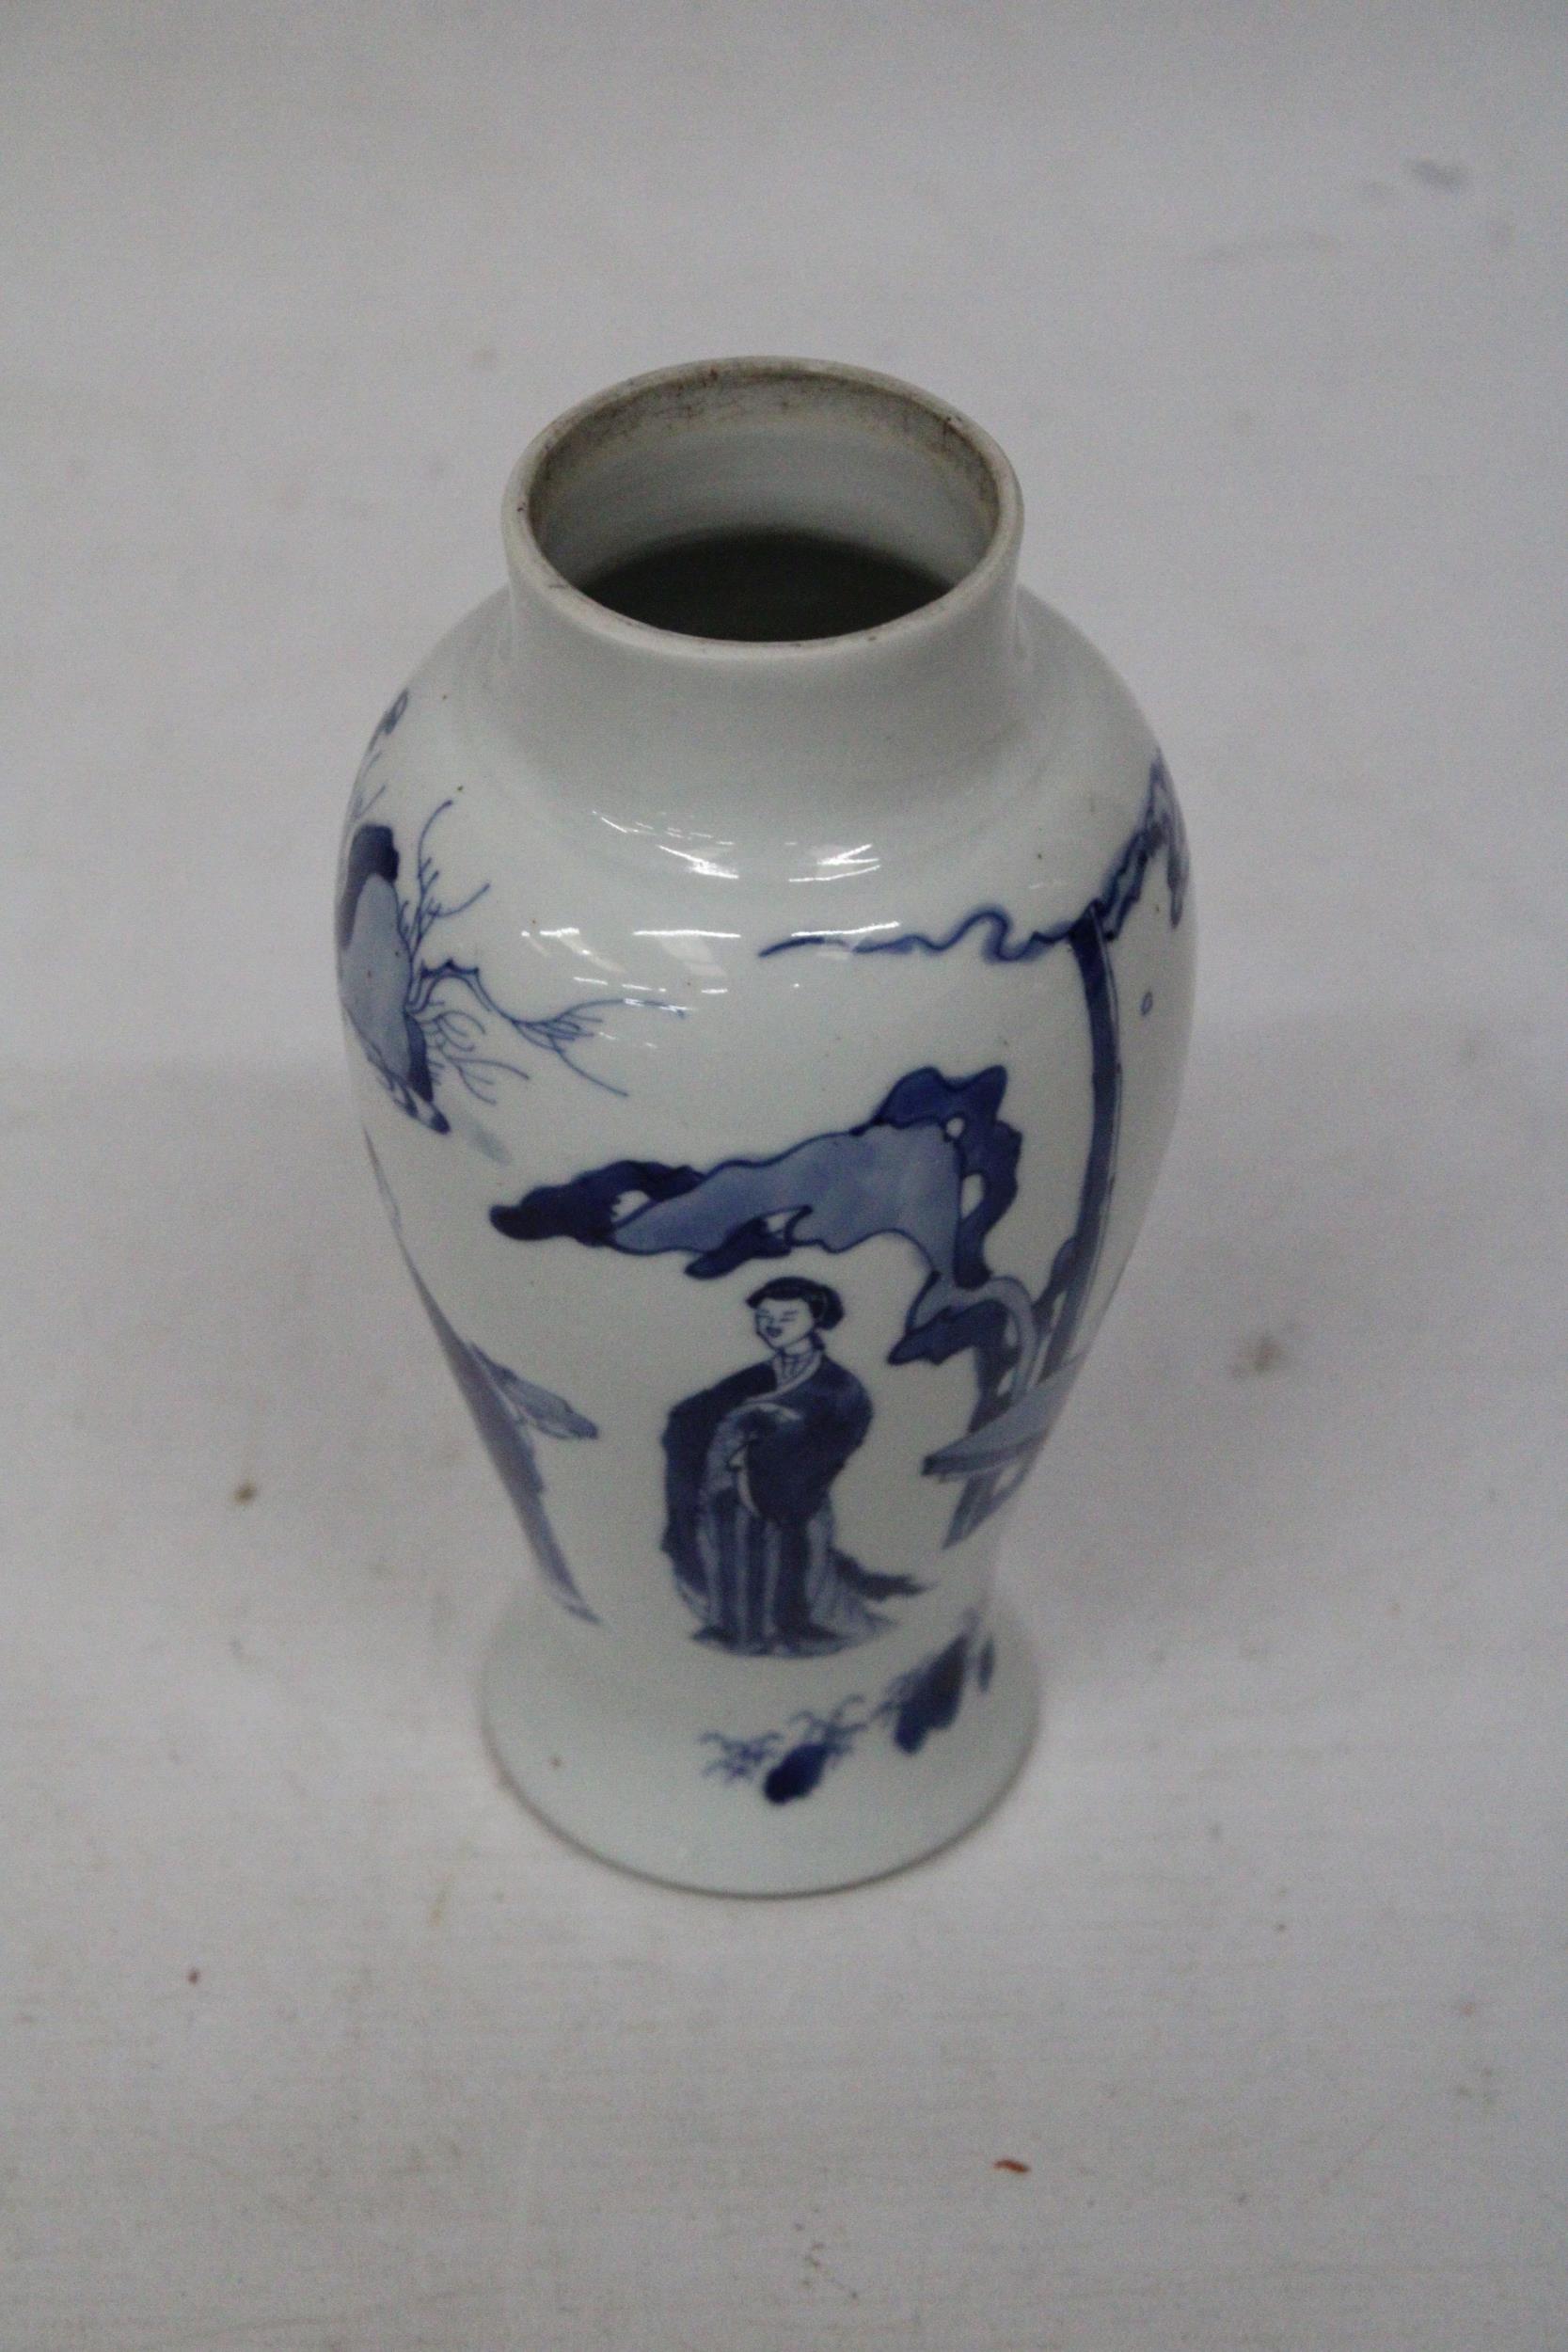 A CHINESE KANGXI PERIOD (1661 - 1722) BLUE AND WHITE PORCELAIN VASE HEIGHT 19CM - Image 5 of 7